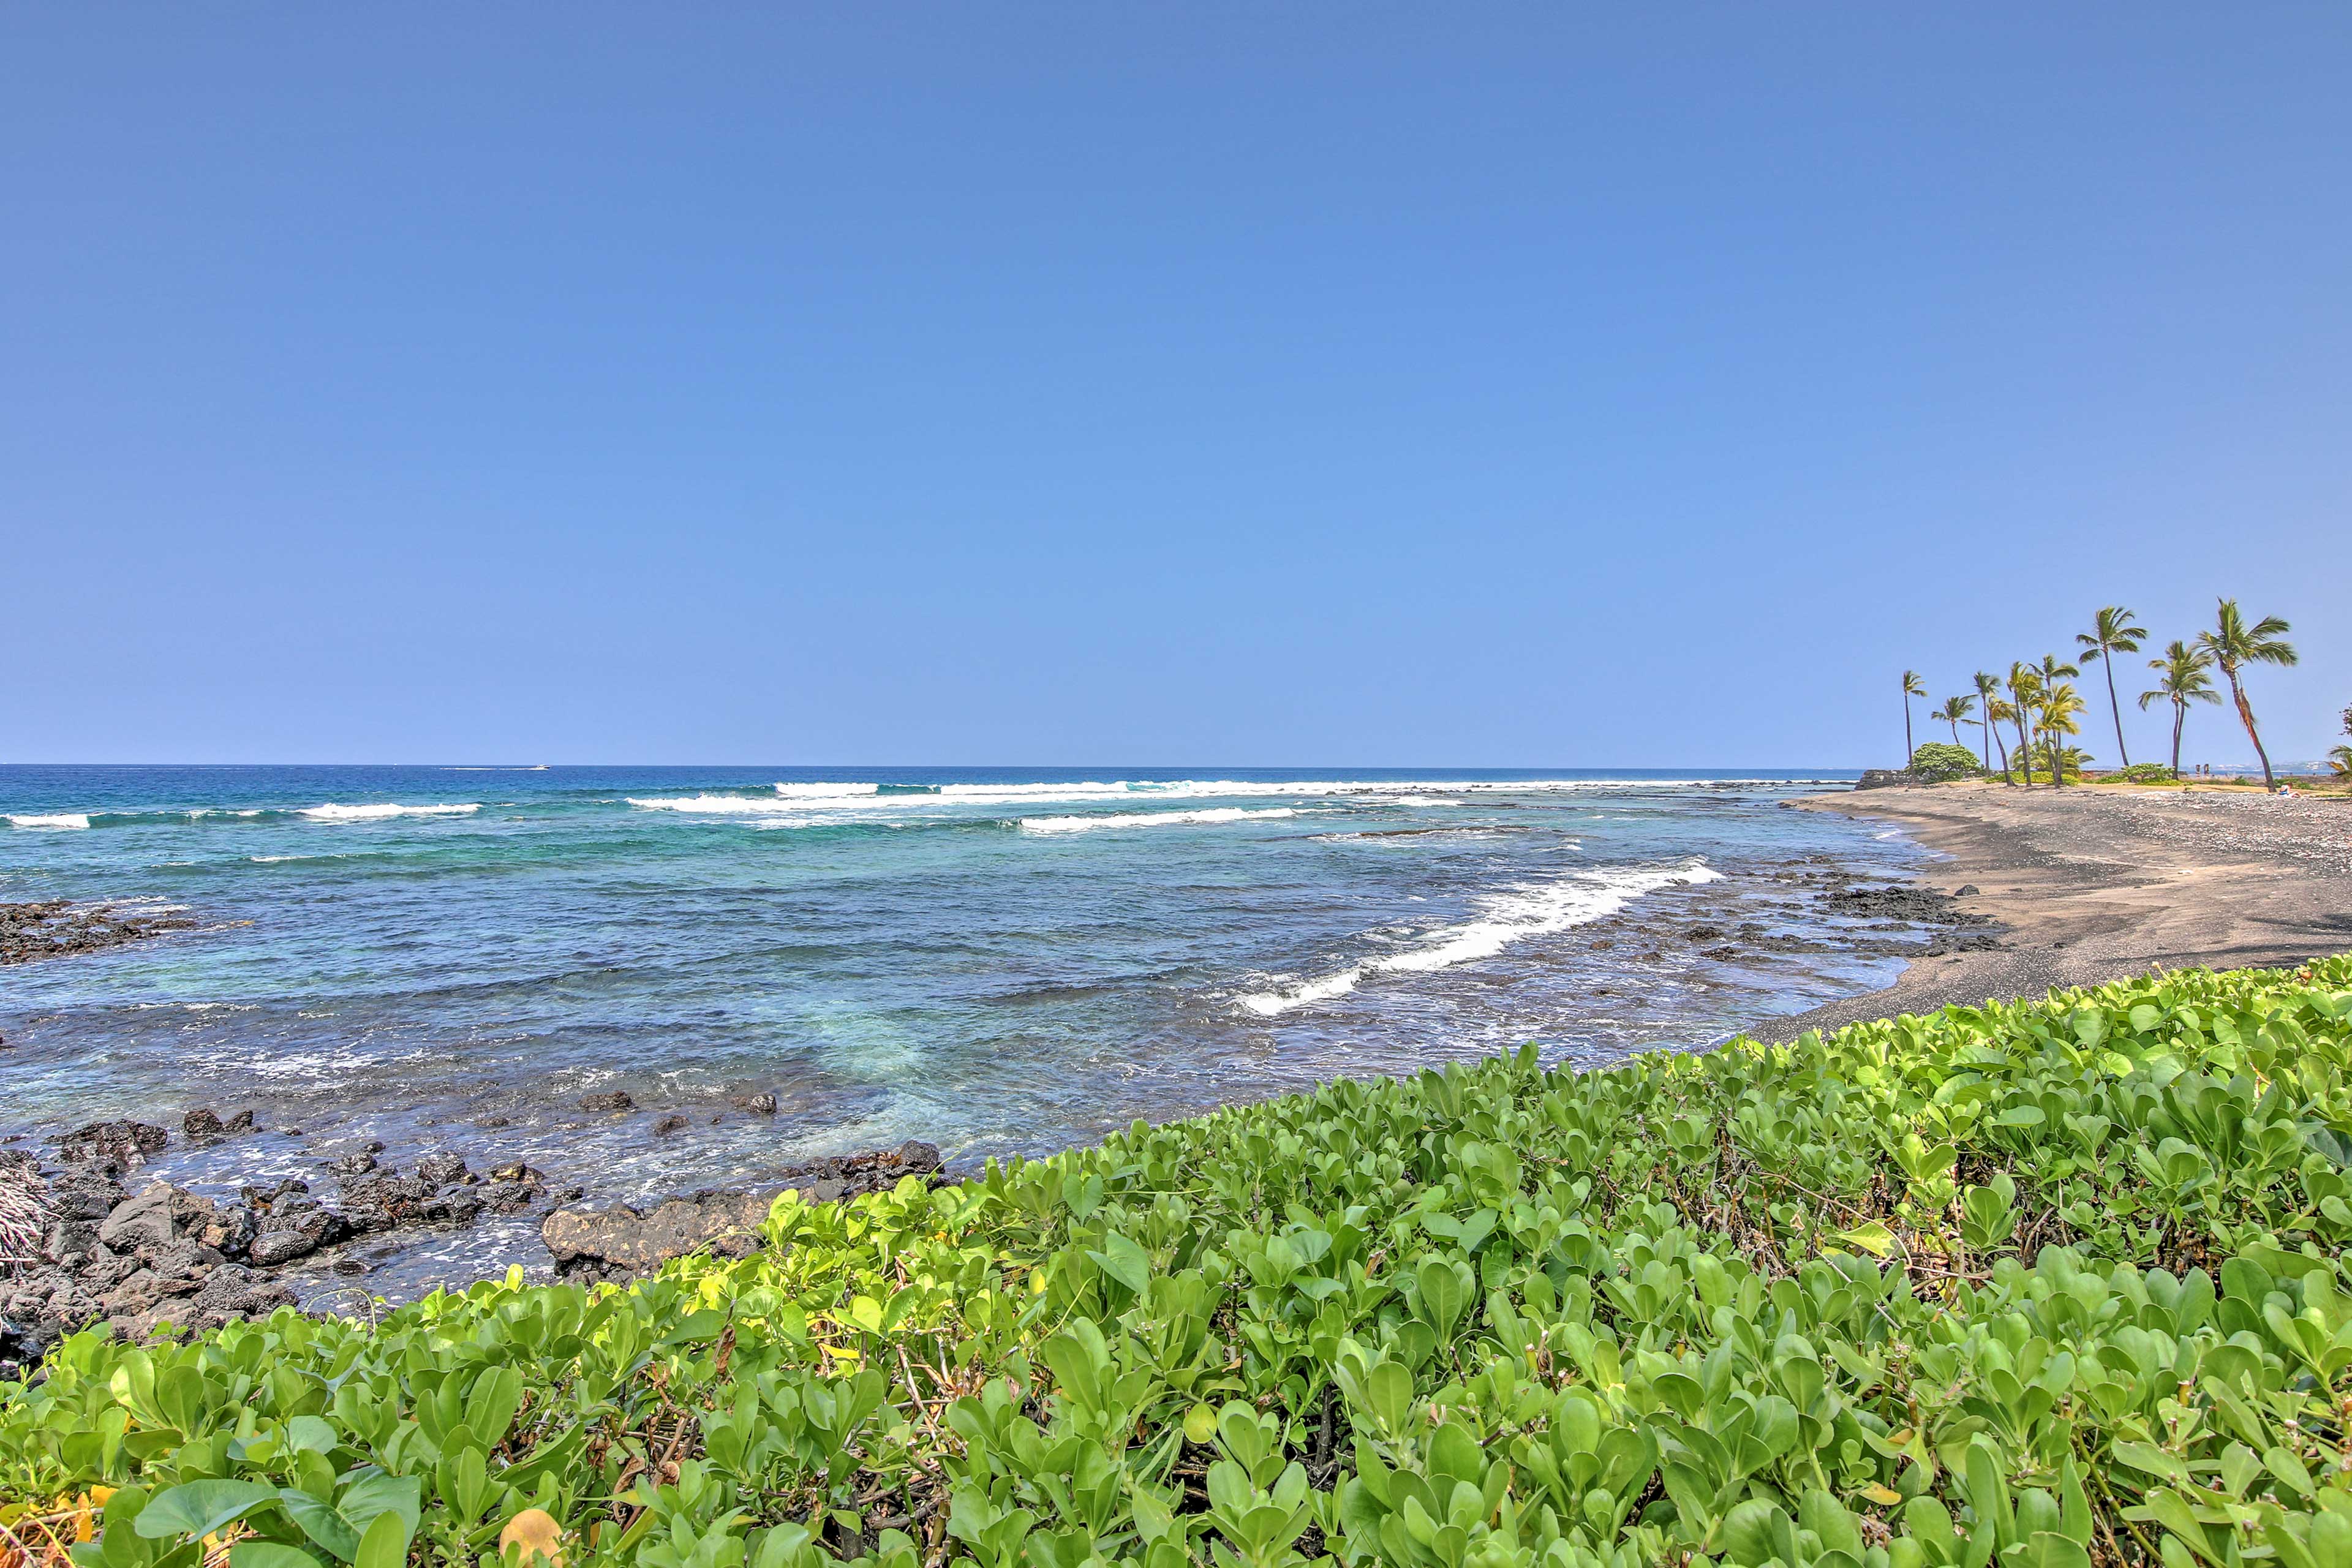 Walk to the beach when you stay at this Kailua Kona vacation rental town home.